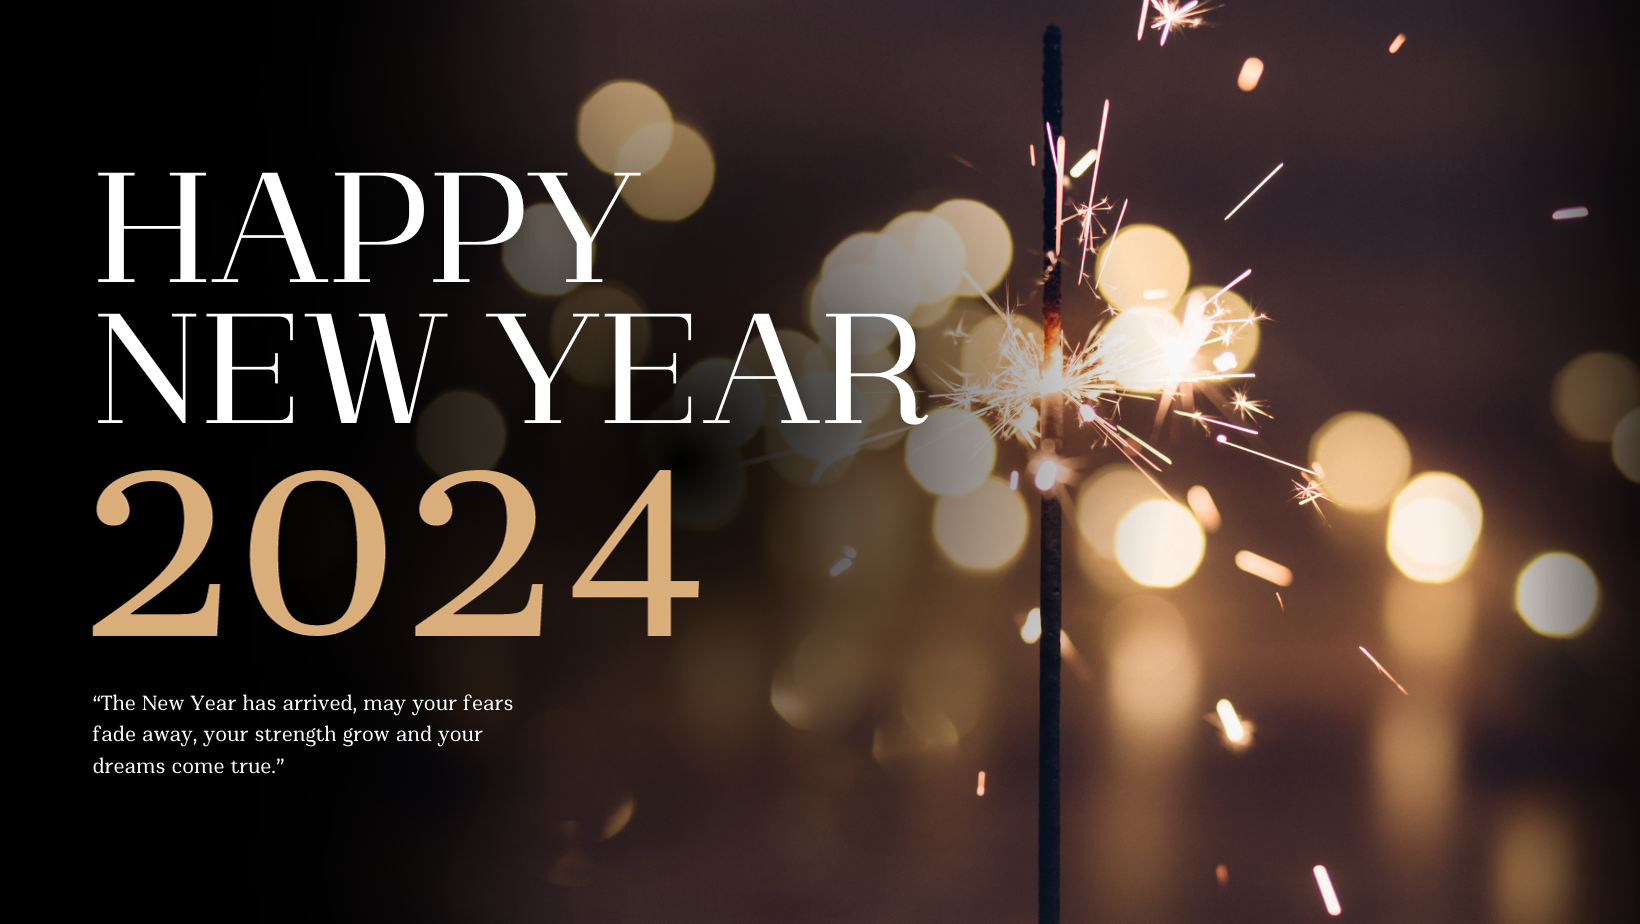 Download New Year 2024 Cover for Facebook